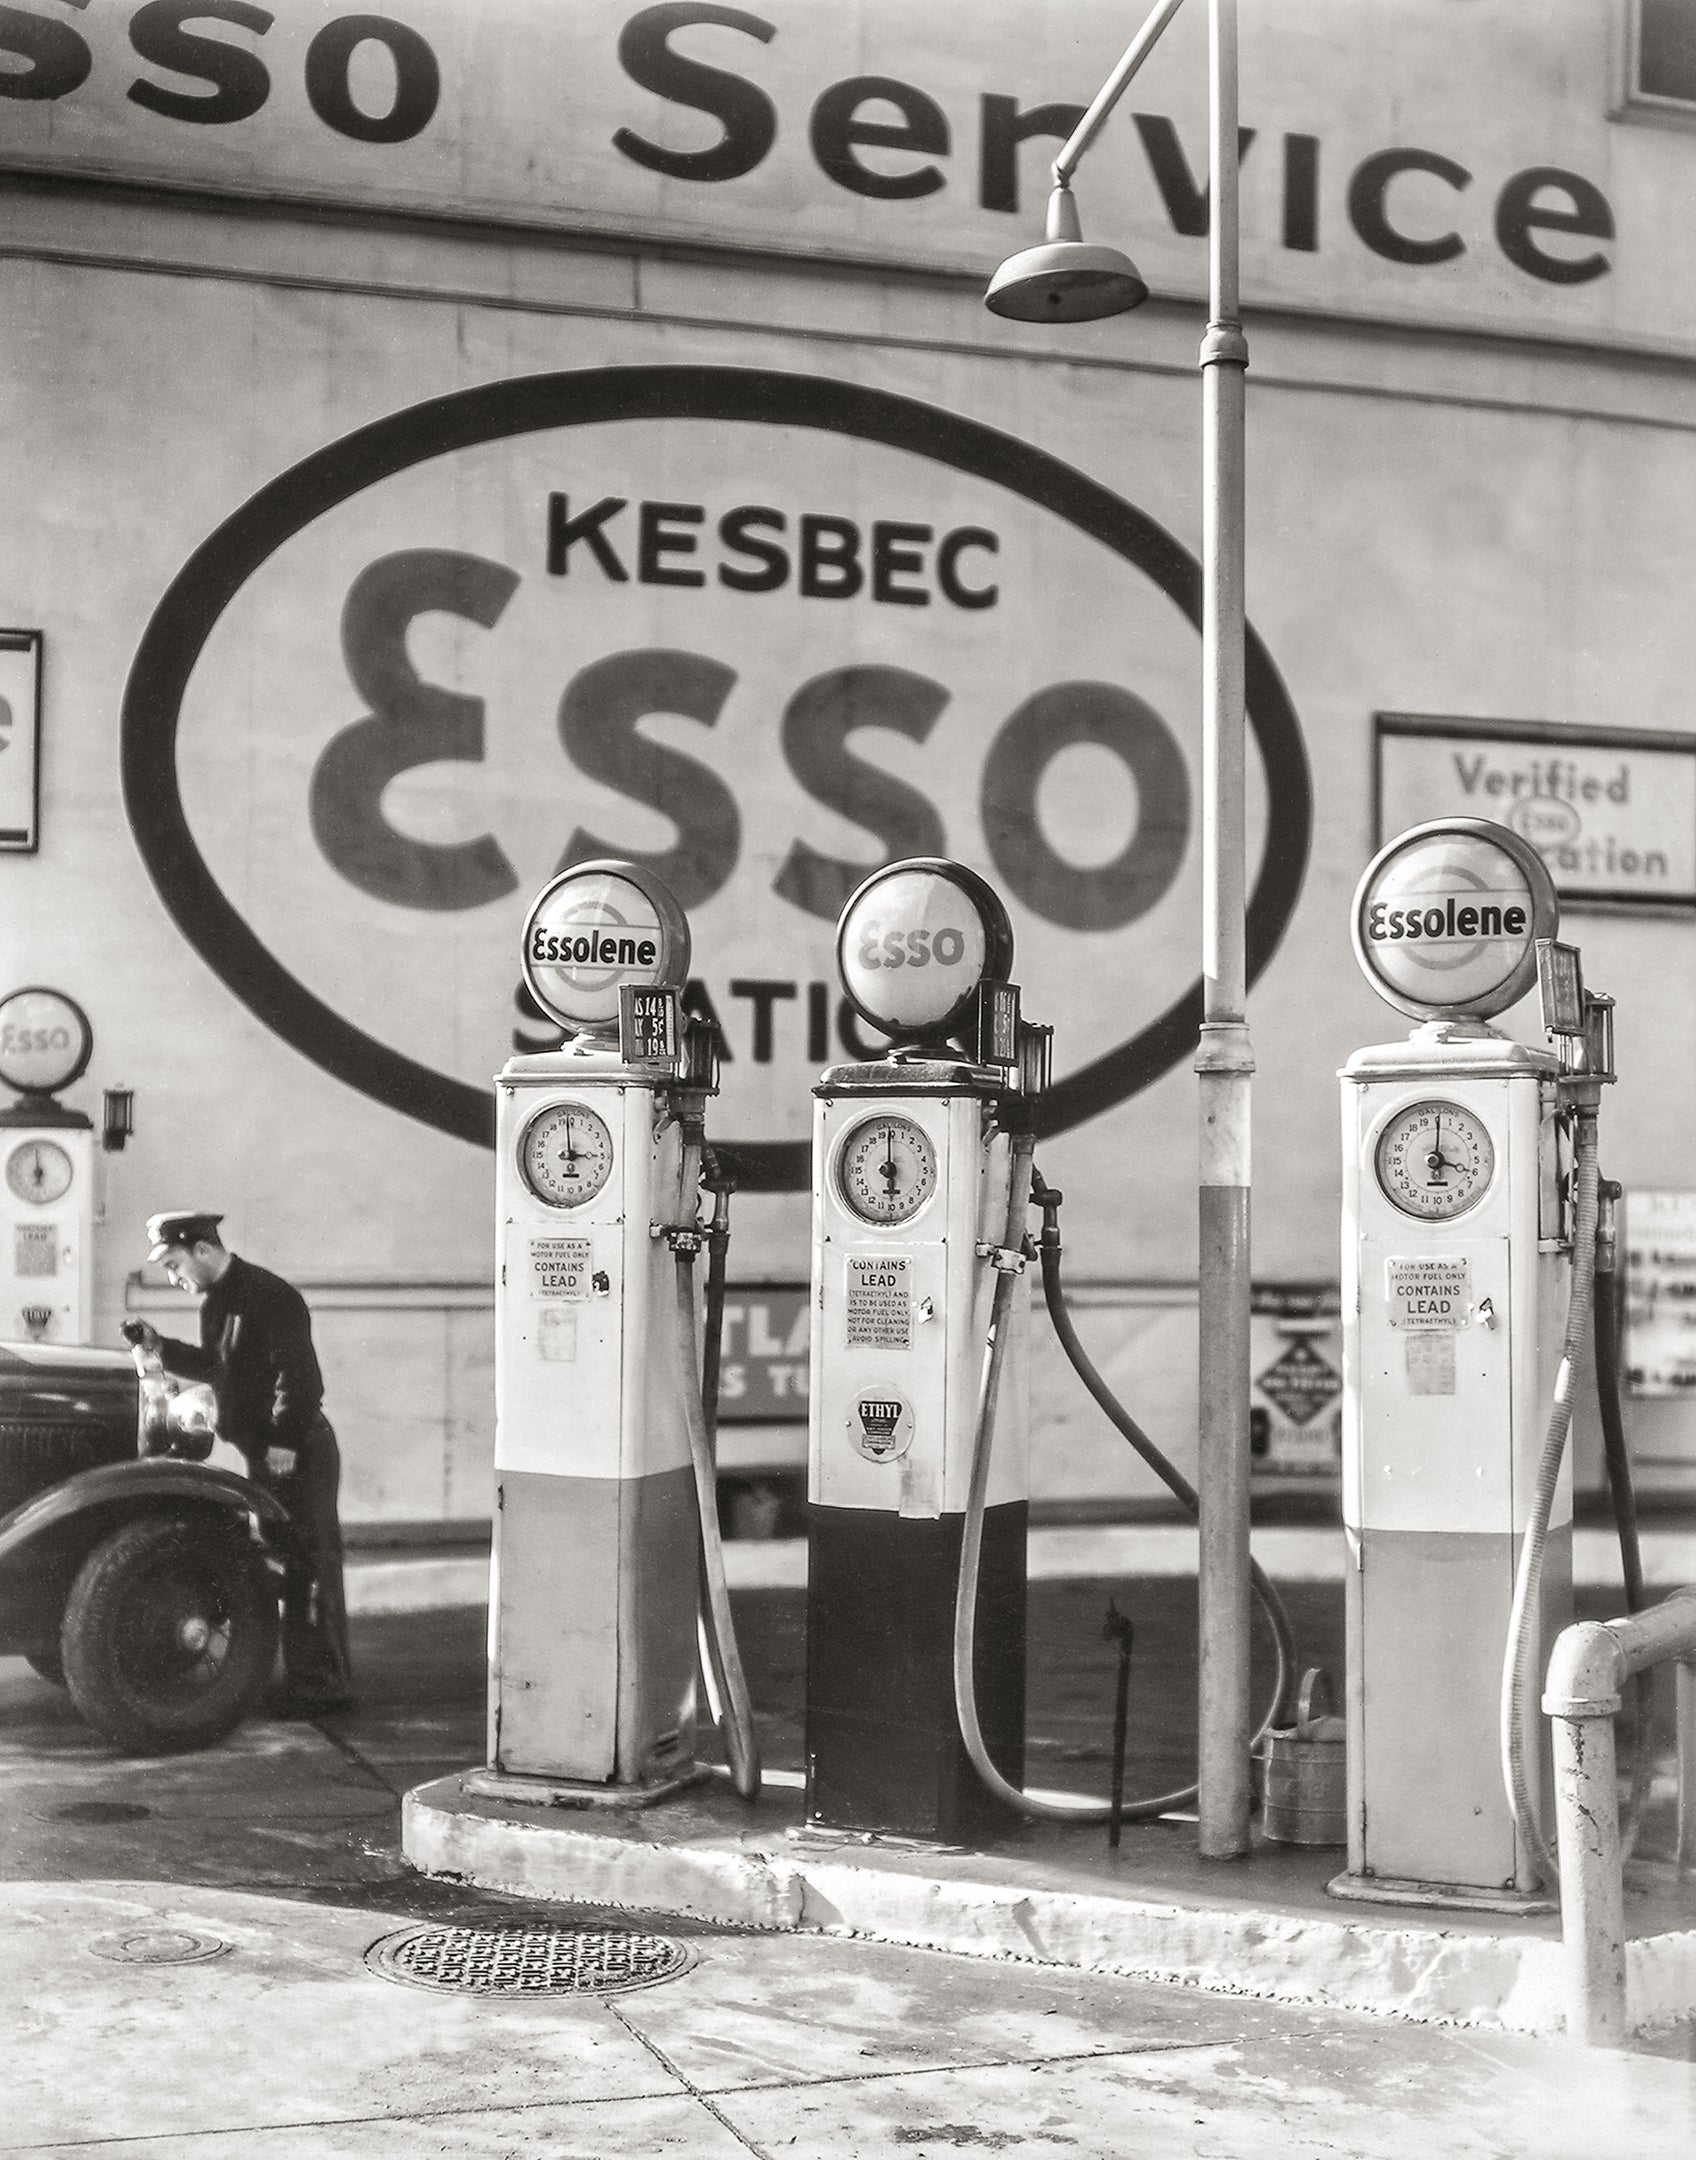 Old Gas Pumps Photo, Esso Station, New York, 1935 Historical Pix